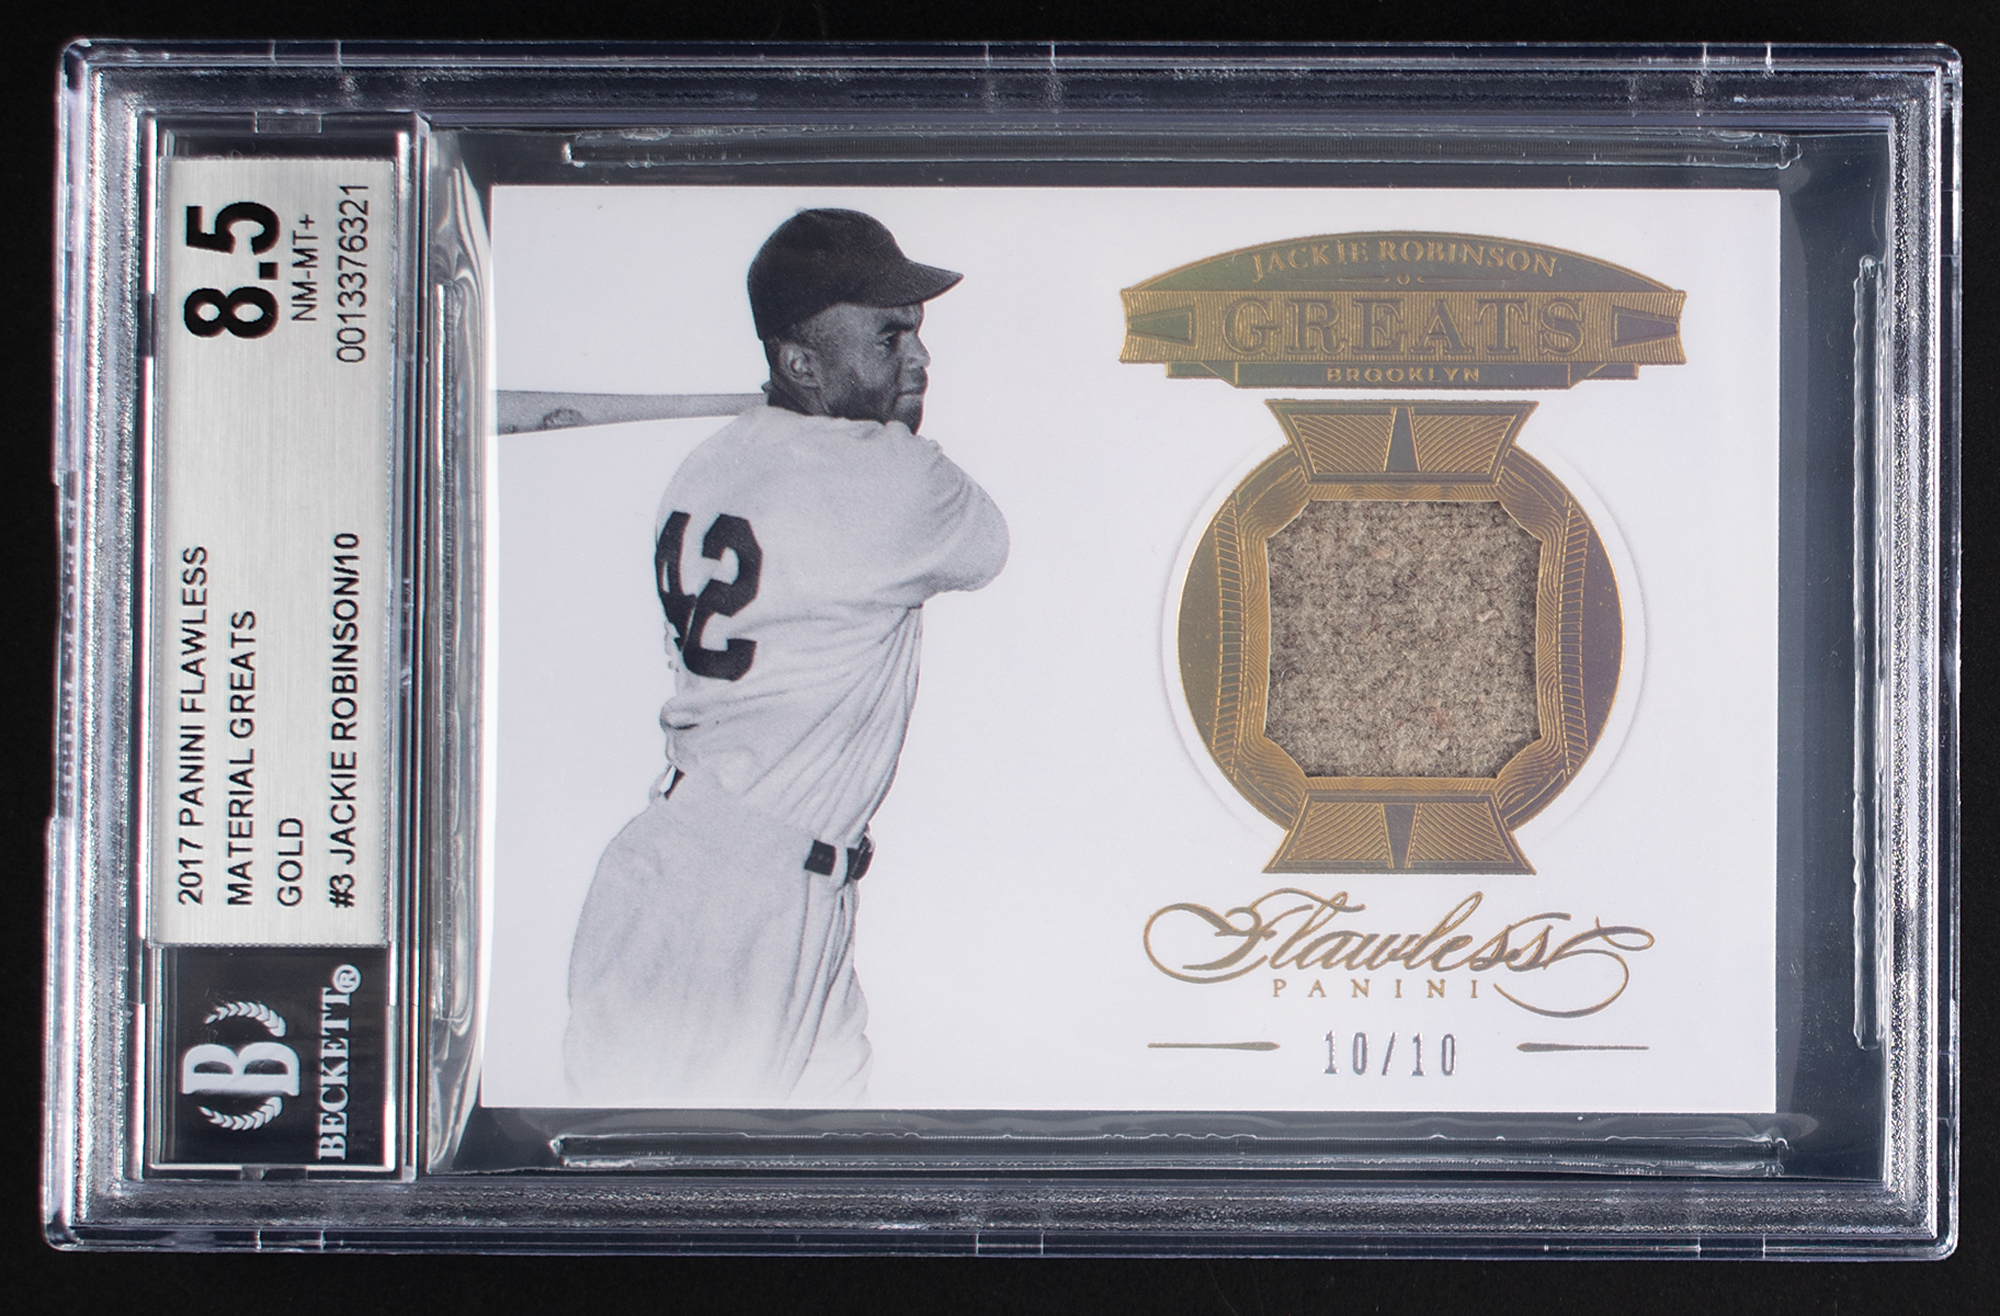 2017 Panini Flawless Material Greats Gold Jackie Robinson Jersey